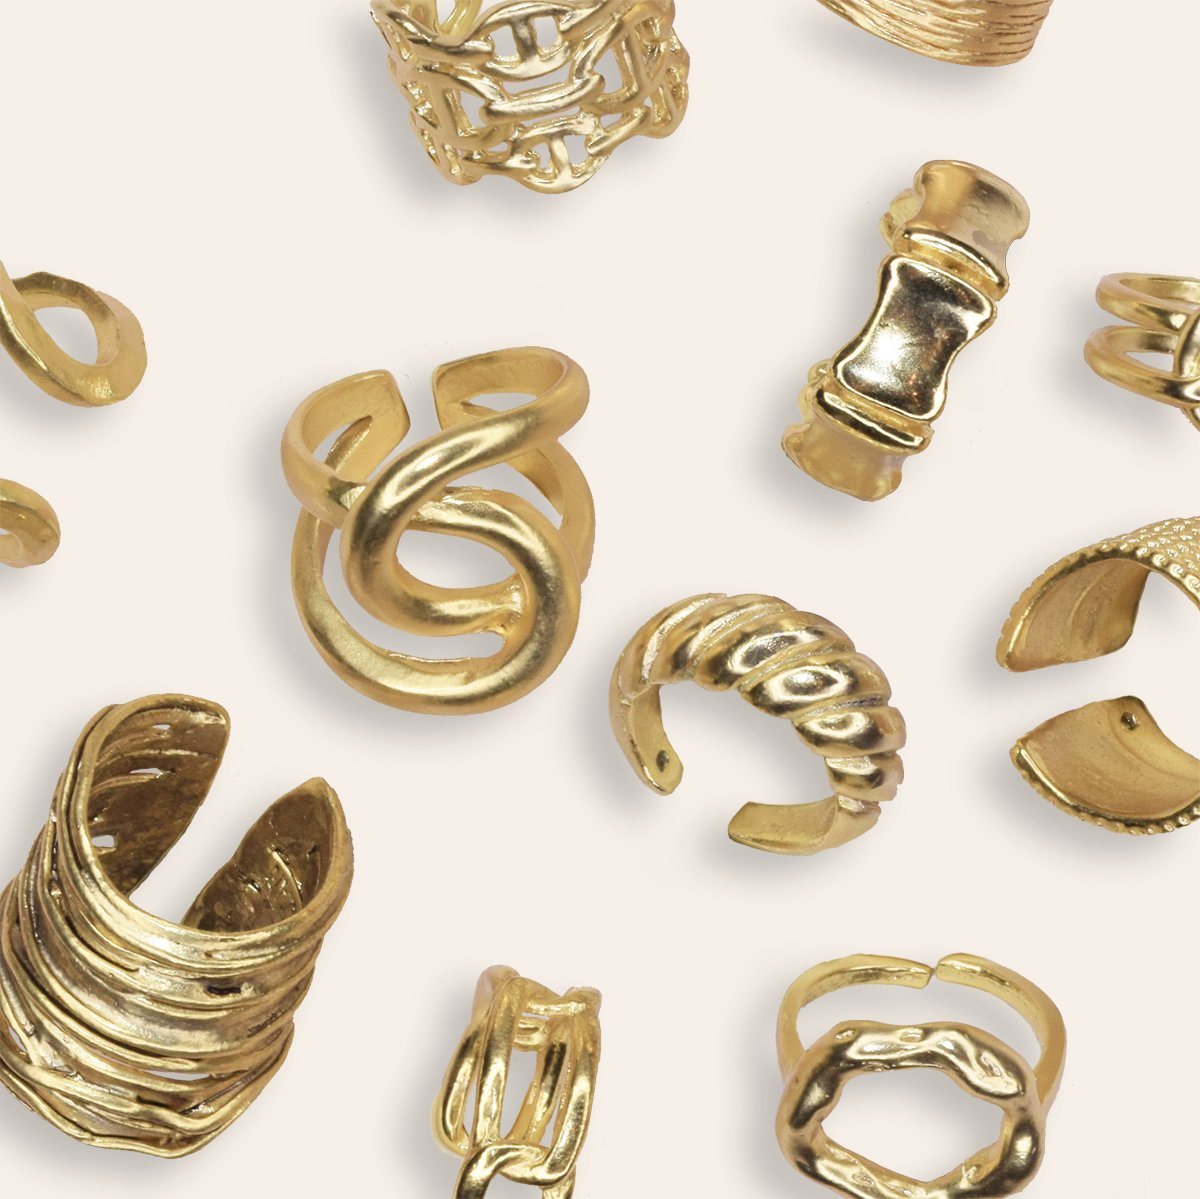 Are You Looking for Gold Jewelry or Adjustable Rings?